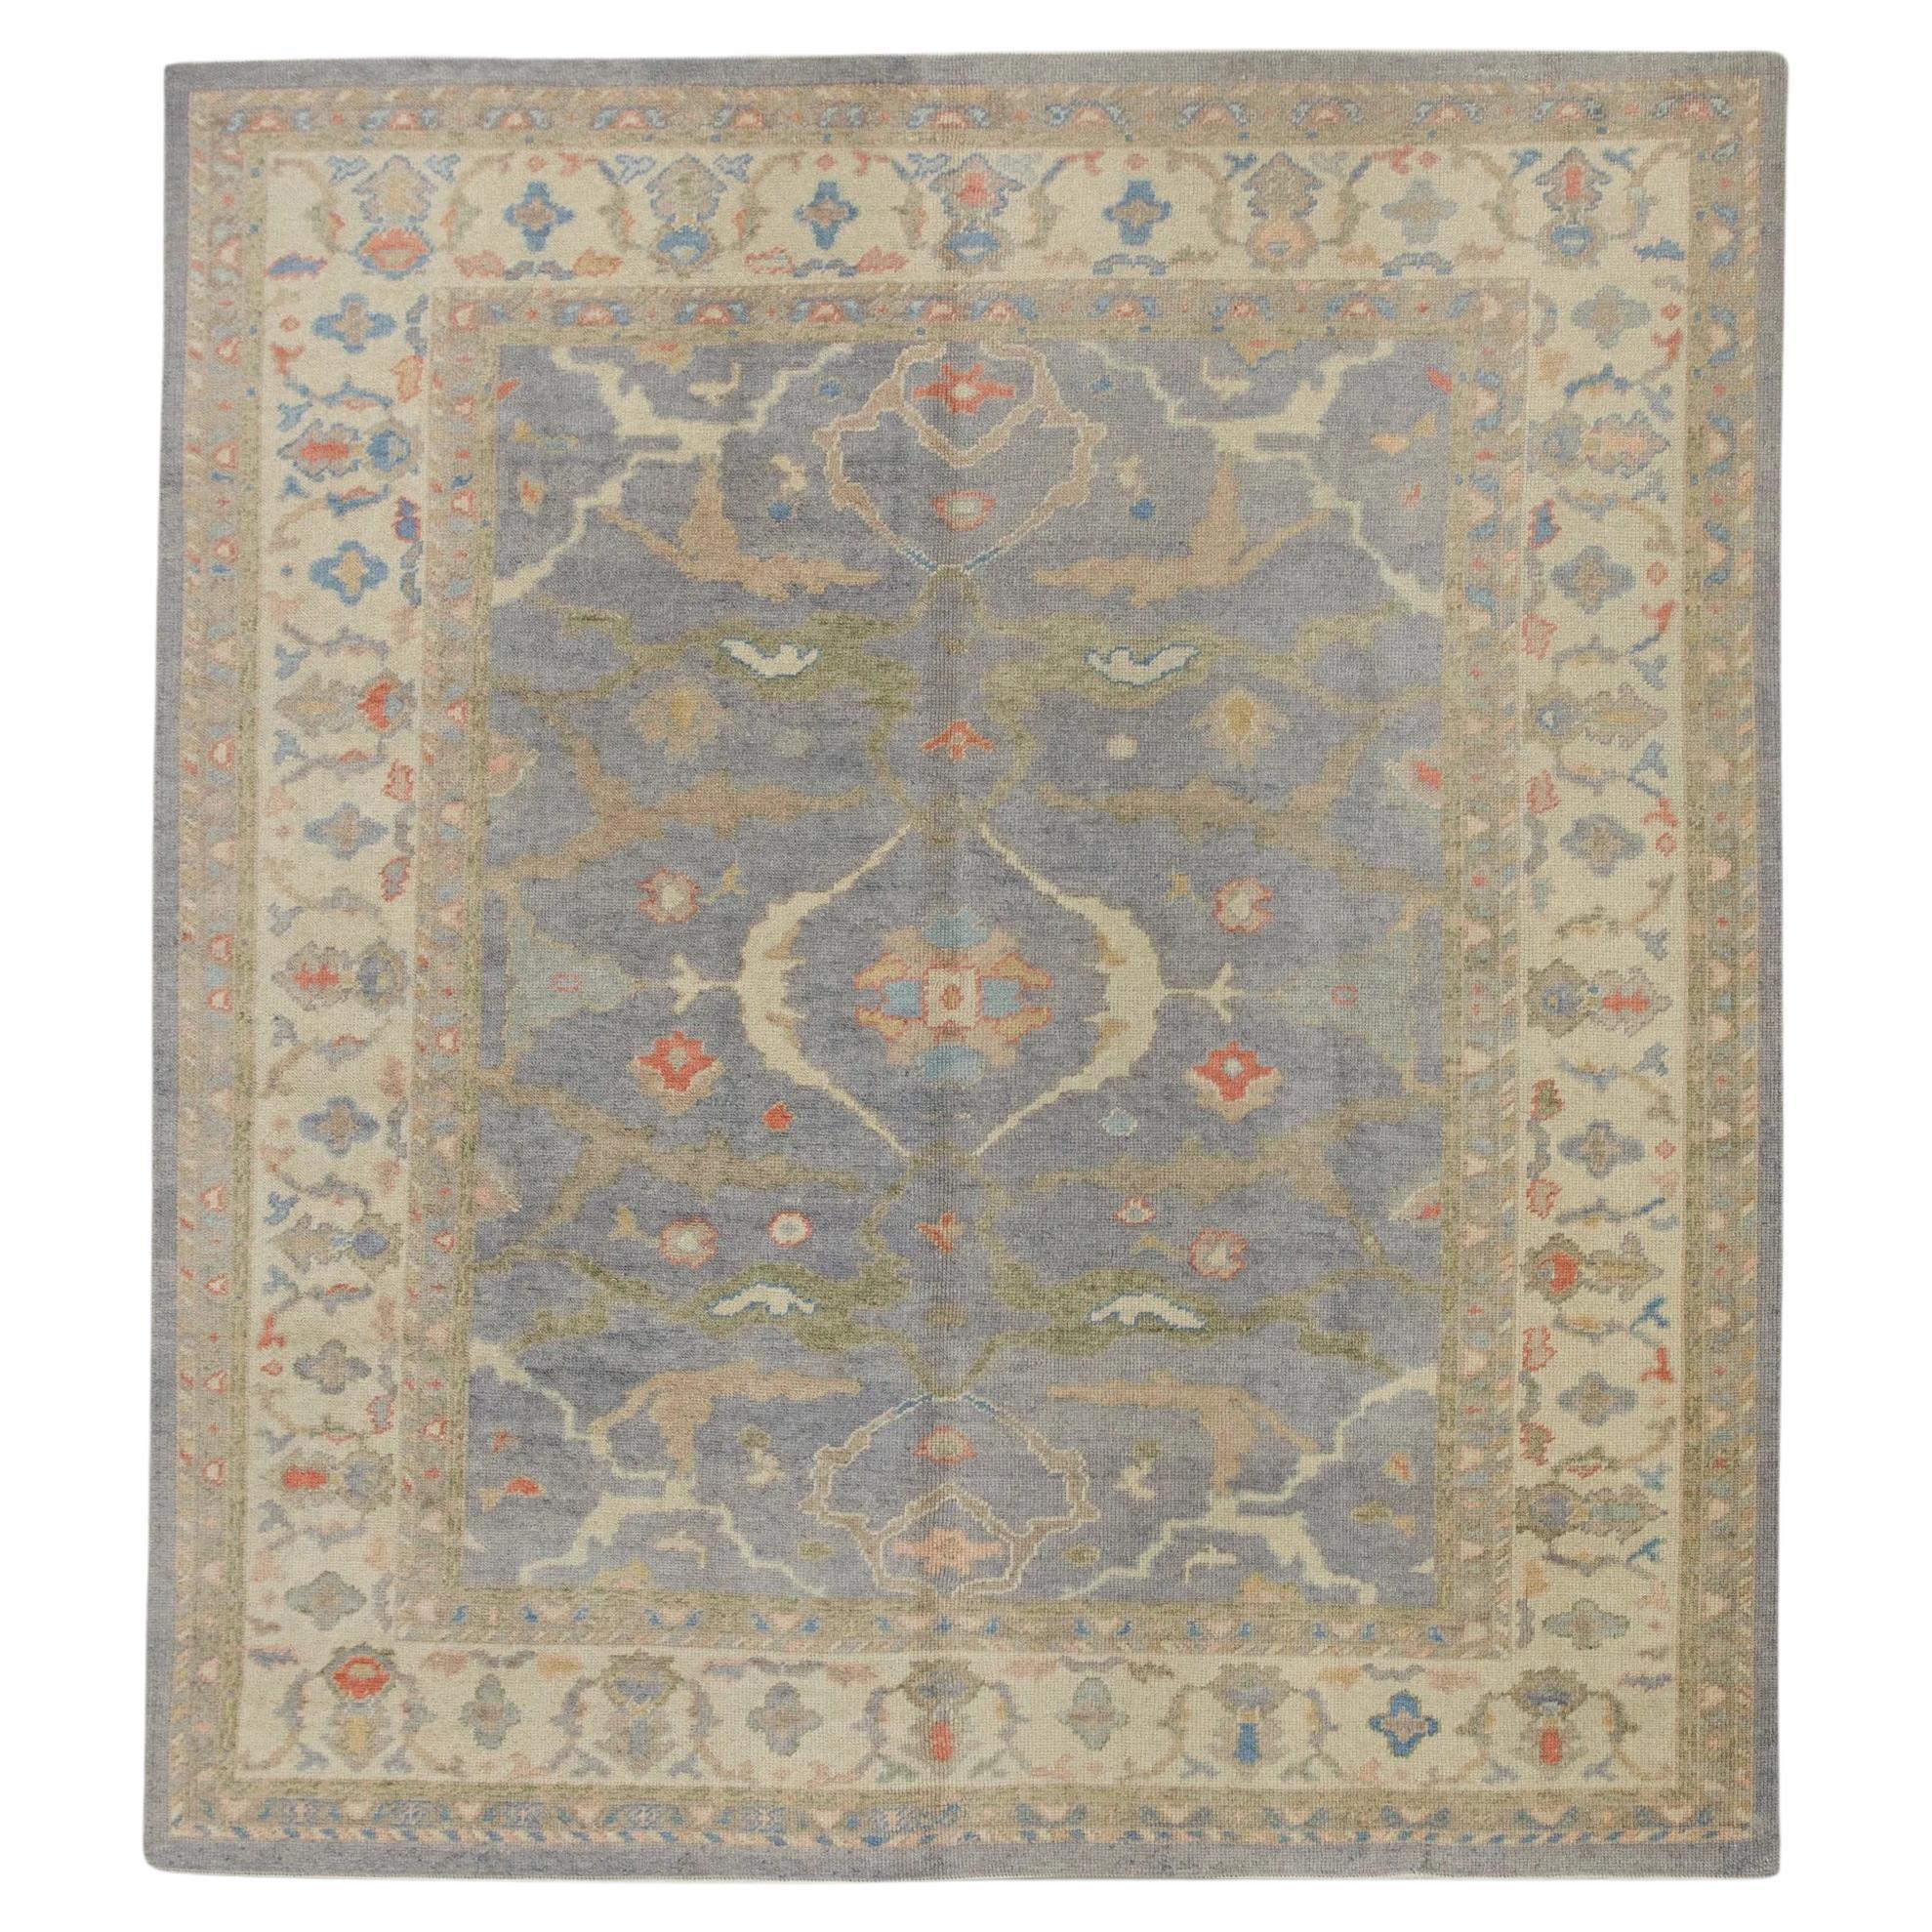 Blue Handwoven Wool Turkish Oushak Rug in Multicolor Floral Pattern 8' x 8'11" For Sale